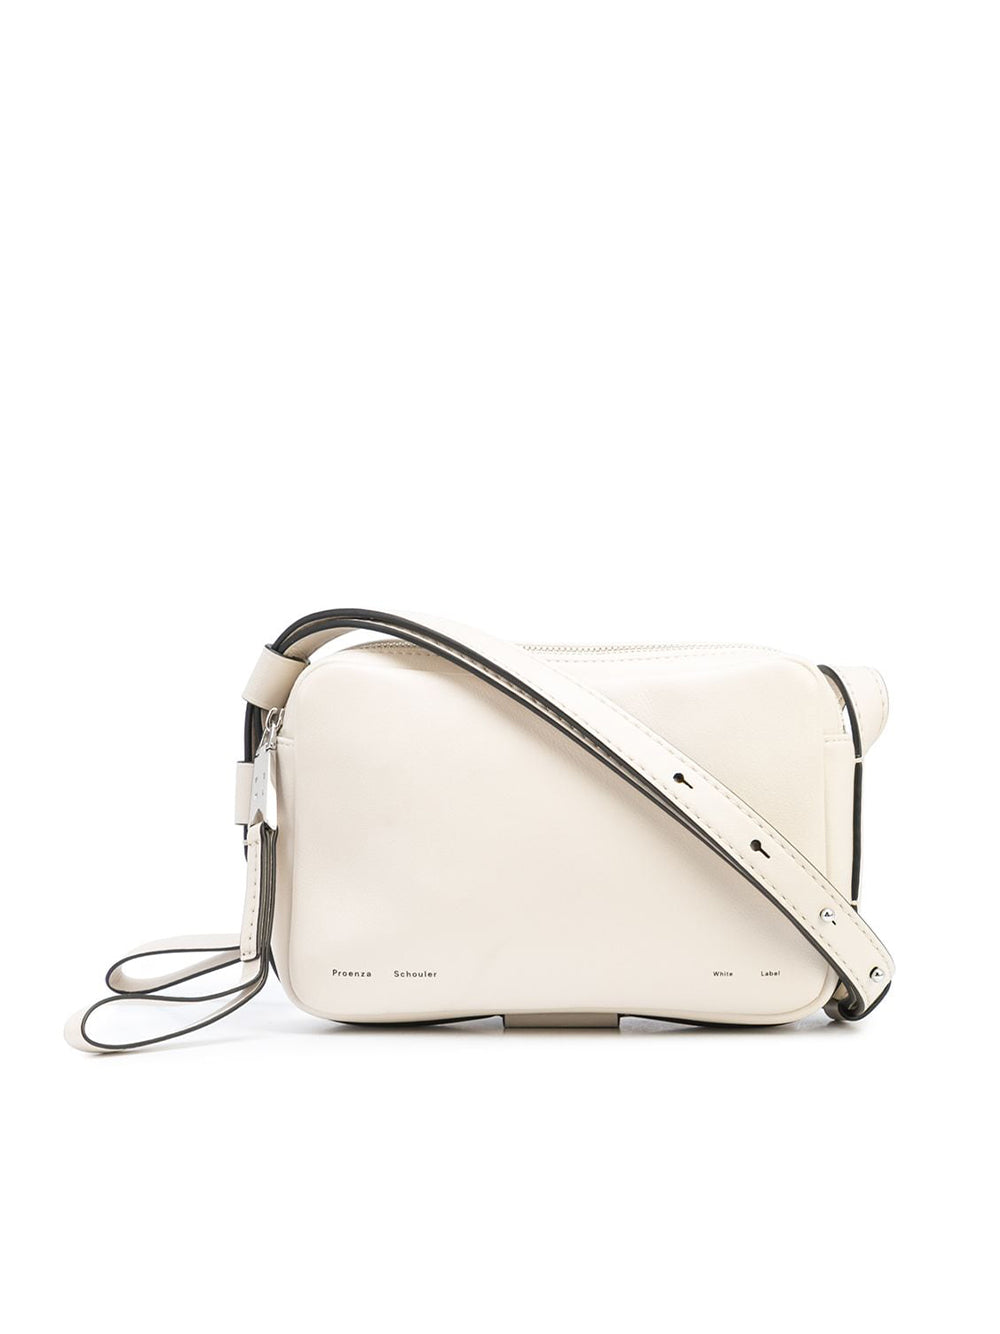 White Watts Leather Bag